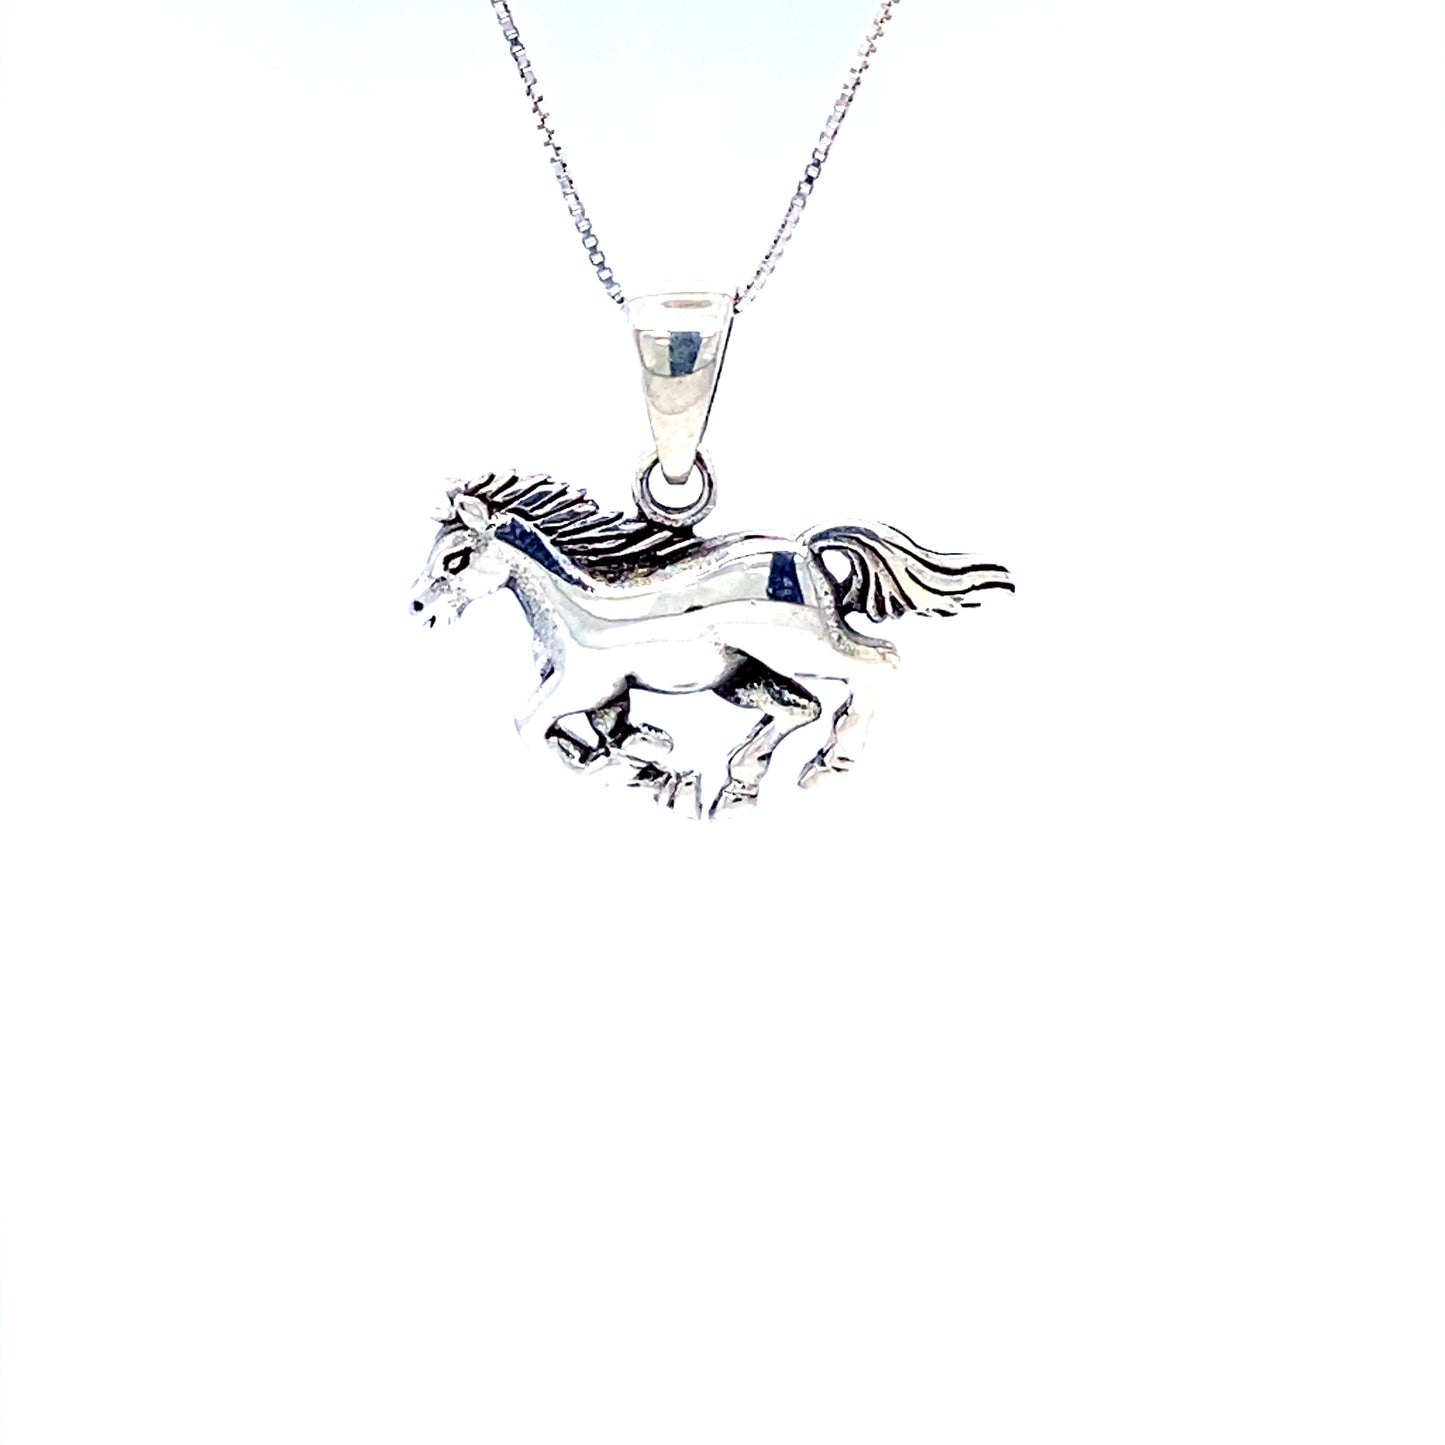 A Super Silver Galloping Horse Charm on a white background.